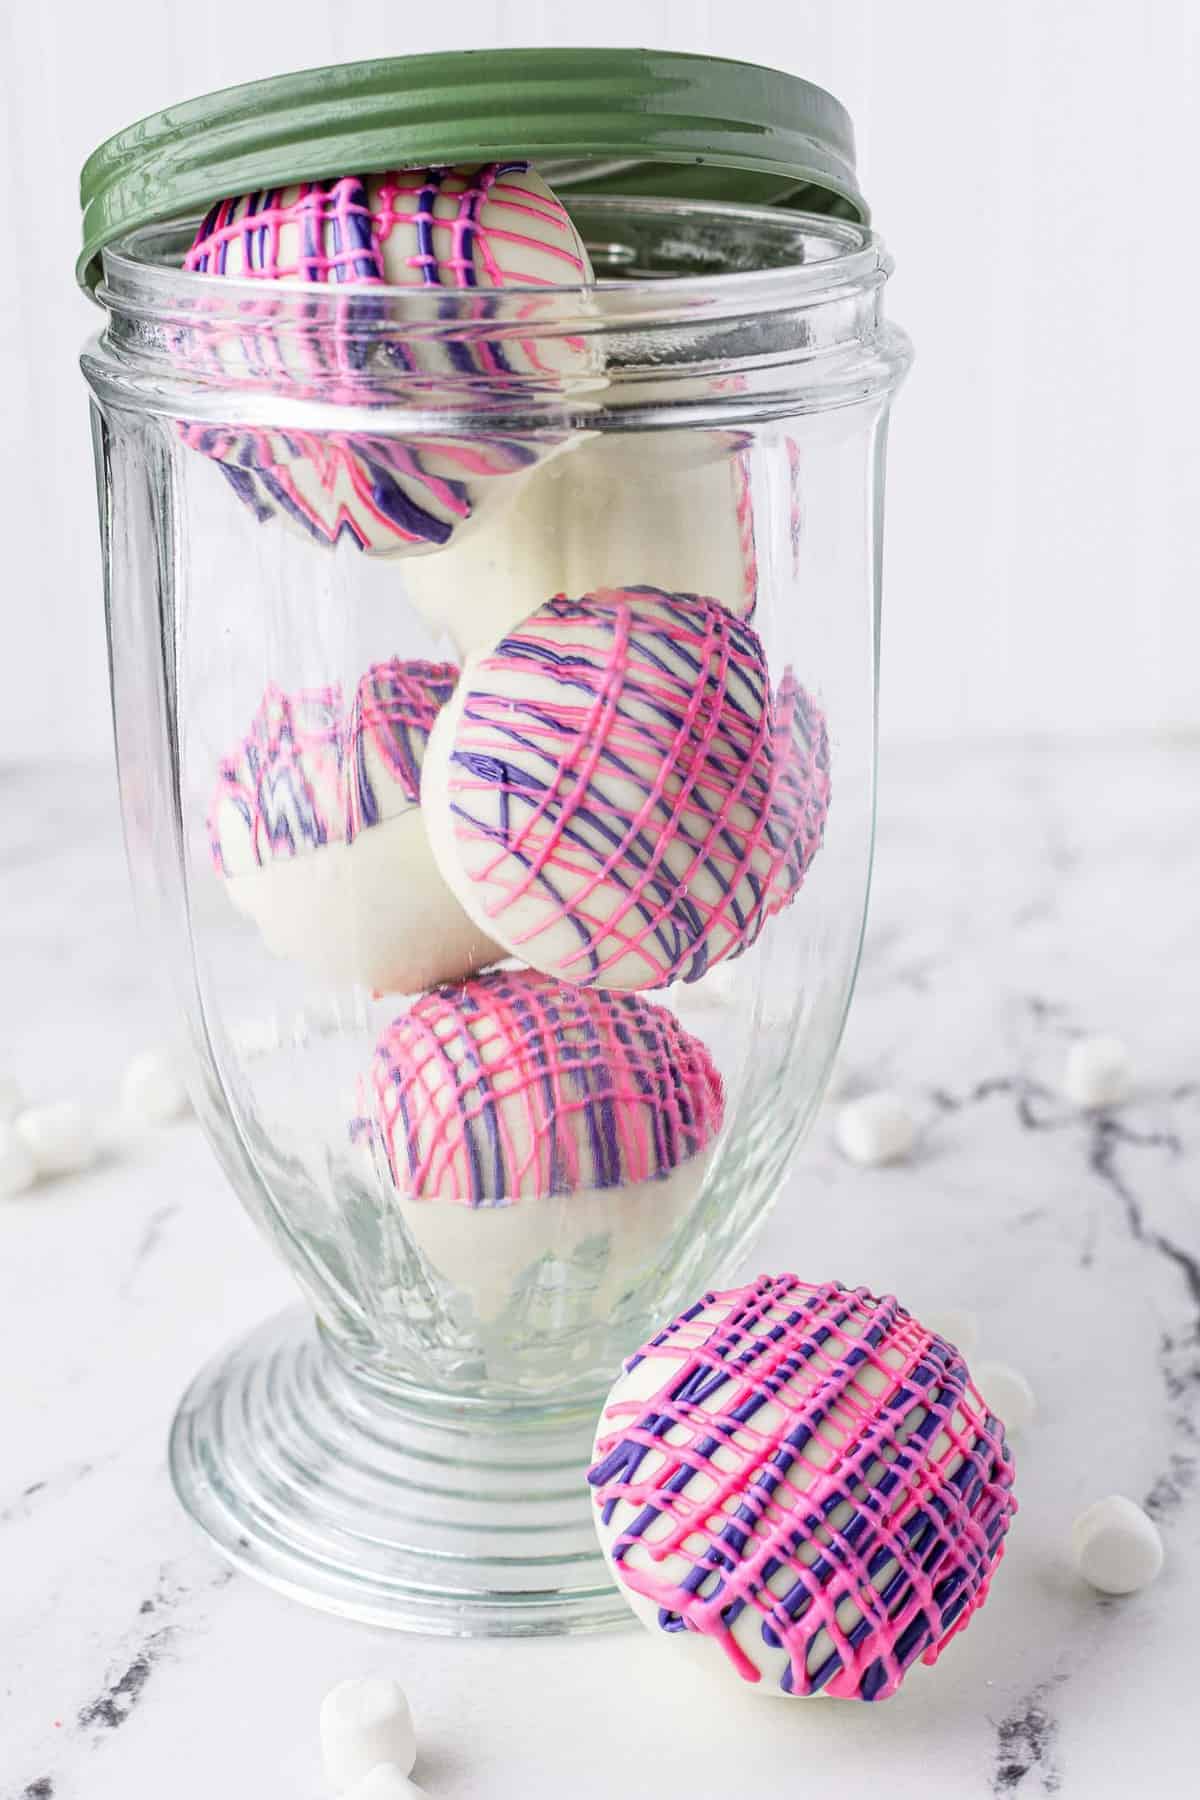 Hot chocolate bombs made with white chocolate, in a decorative jar.